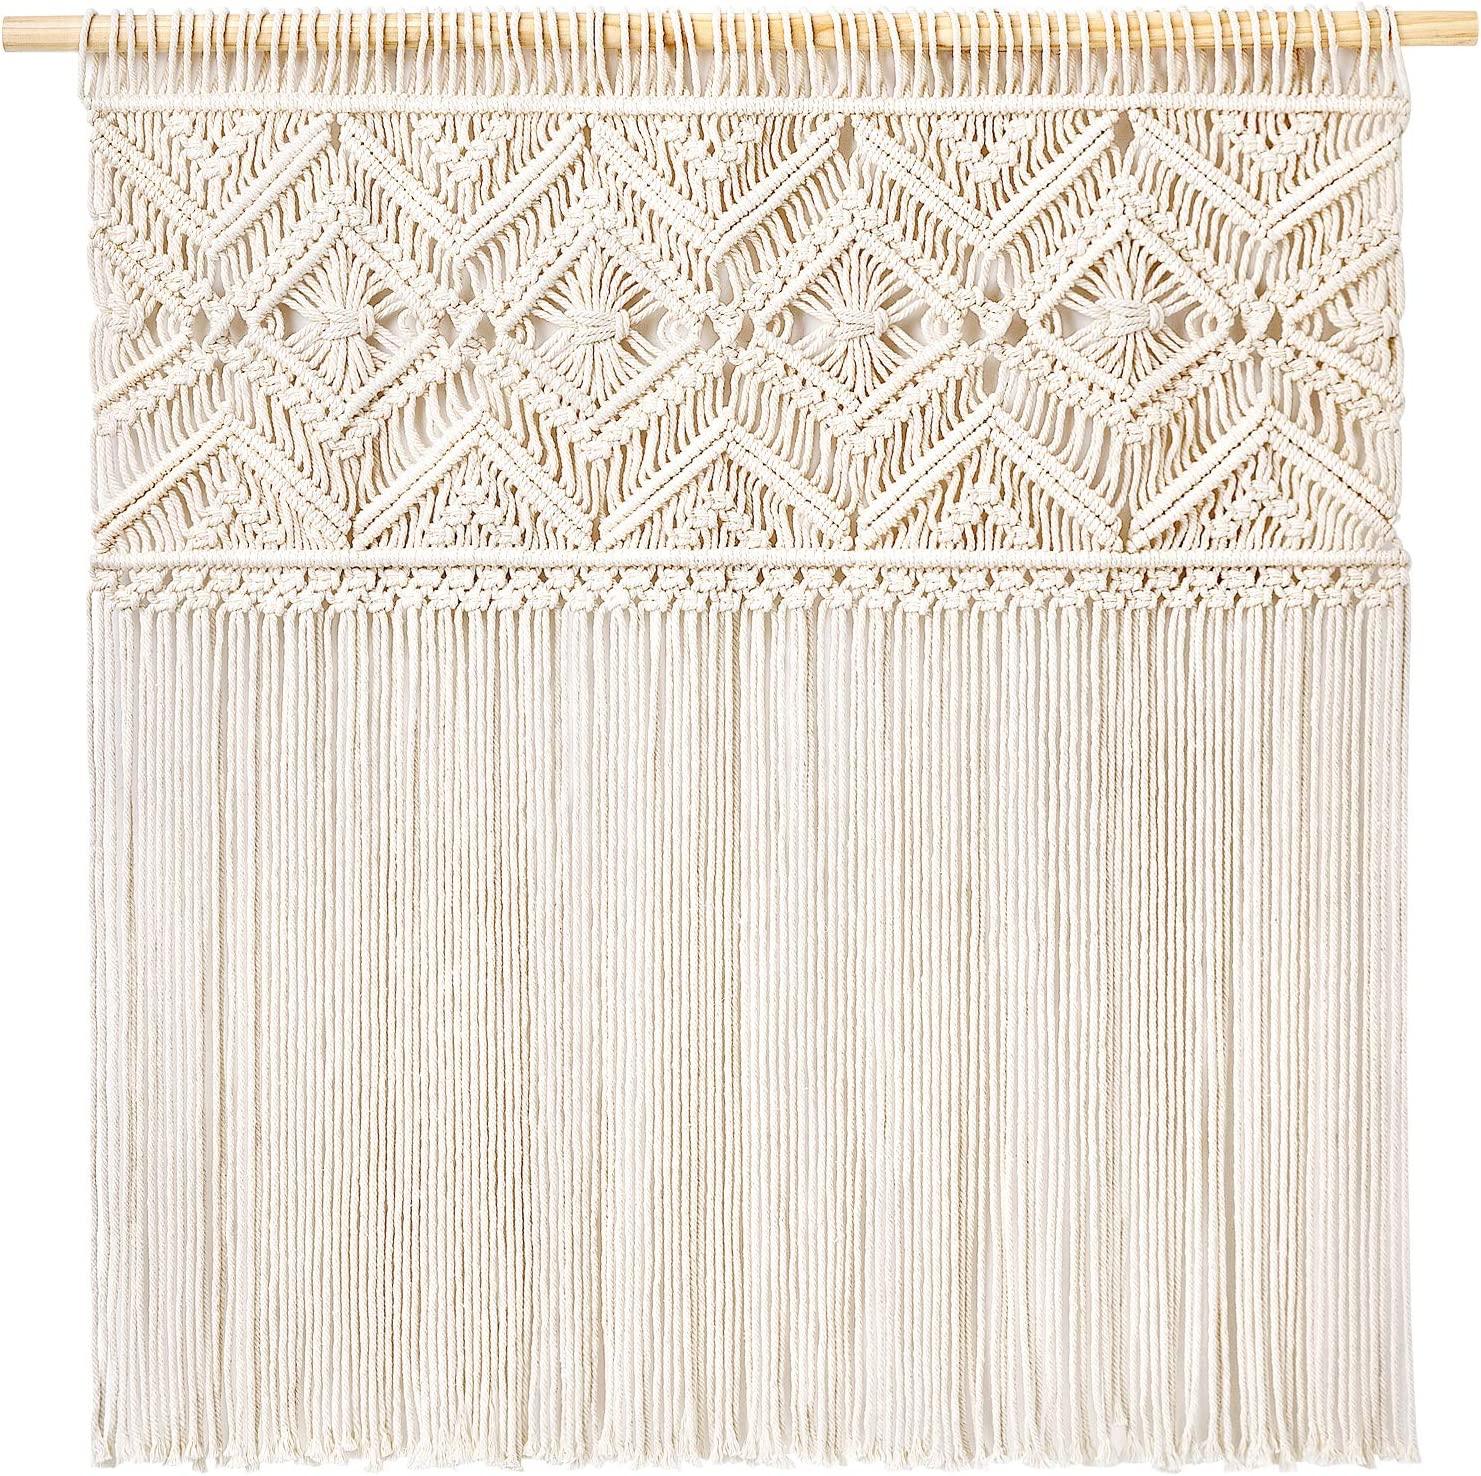 Large Macrame Wall Hanging Boho Decor Tapestry Fringe Wall Art Headboard Woven Home Decoration - Decotree.co Online Shop